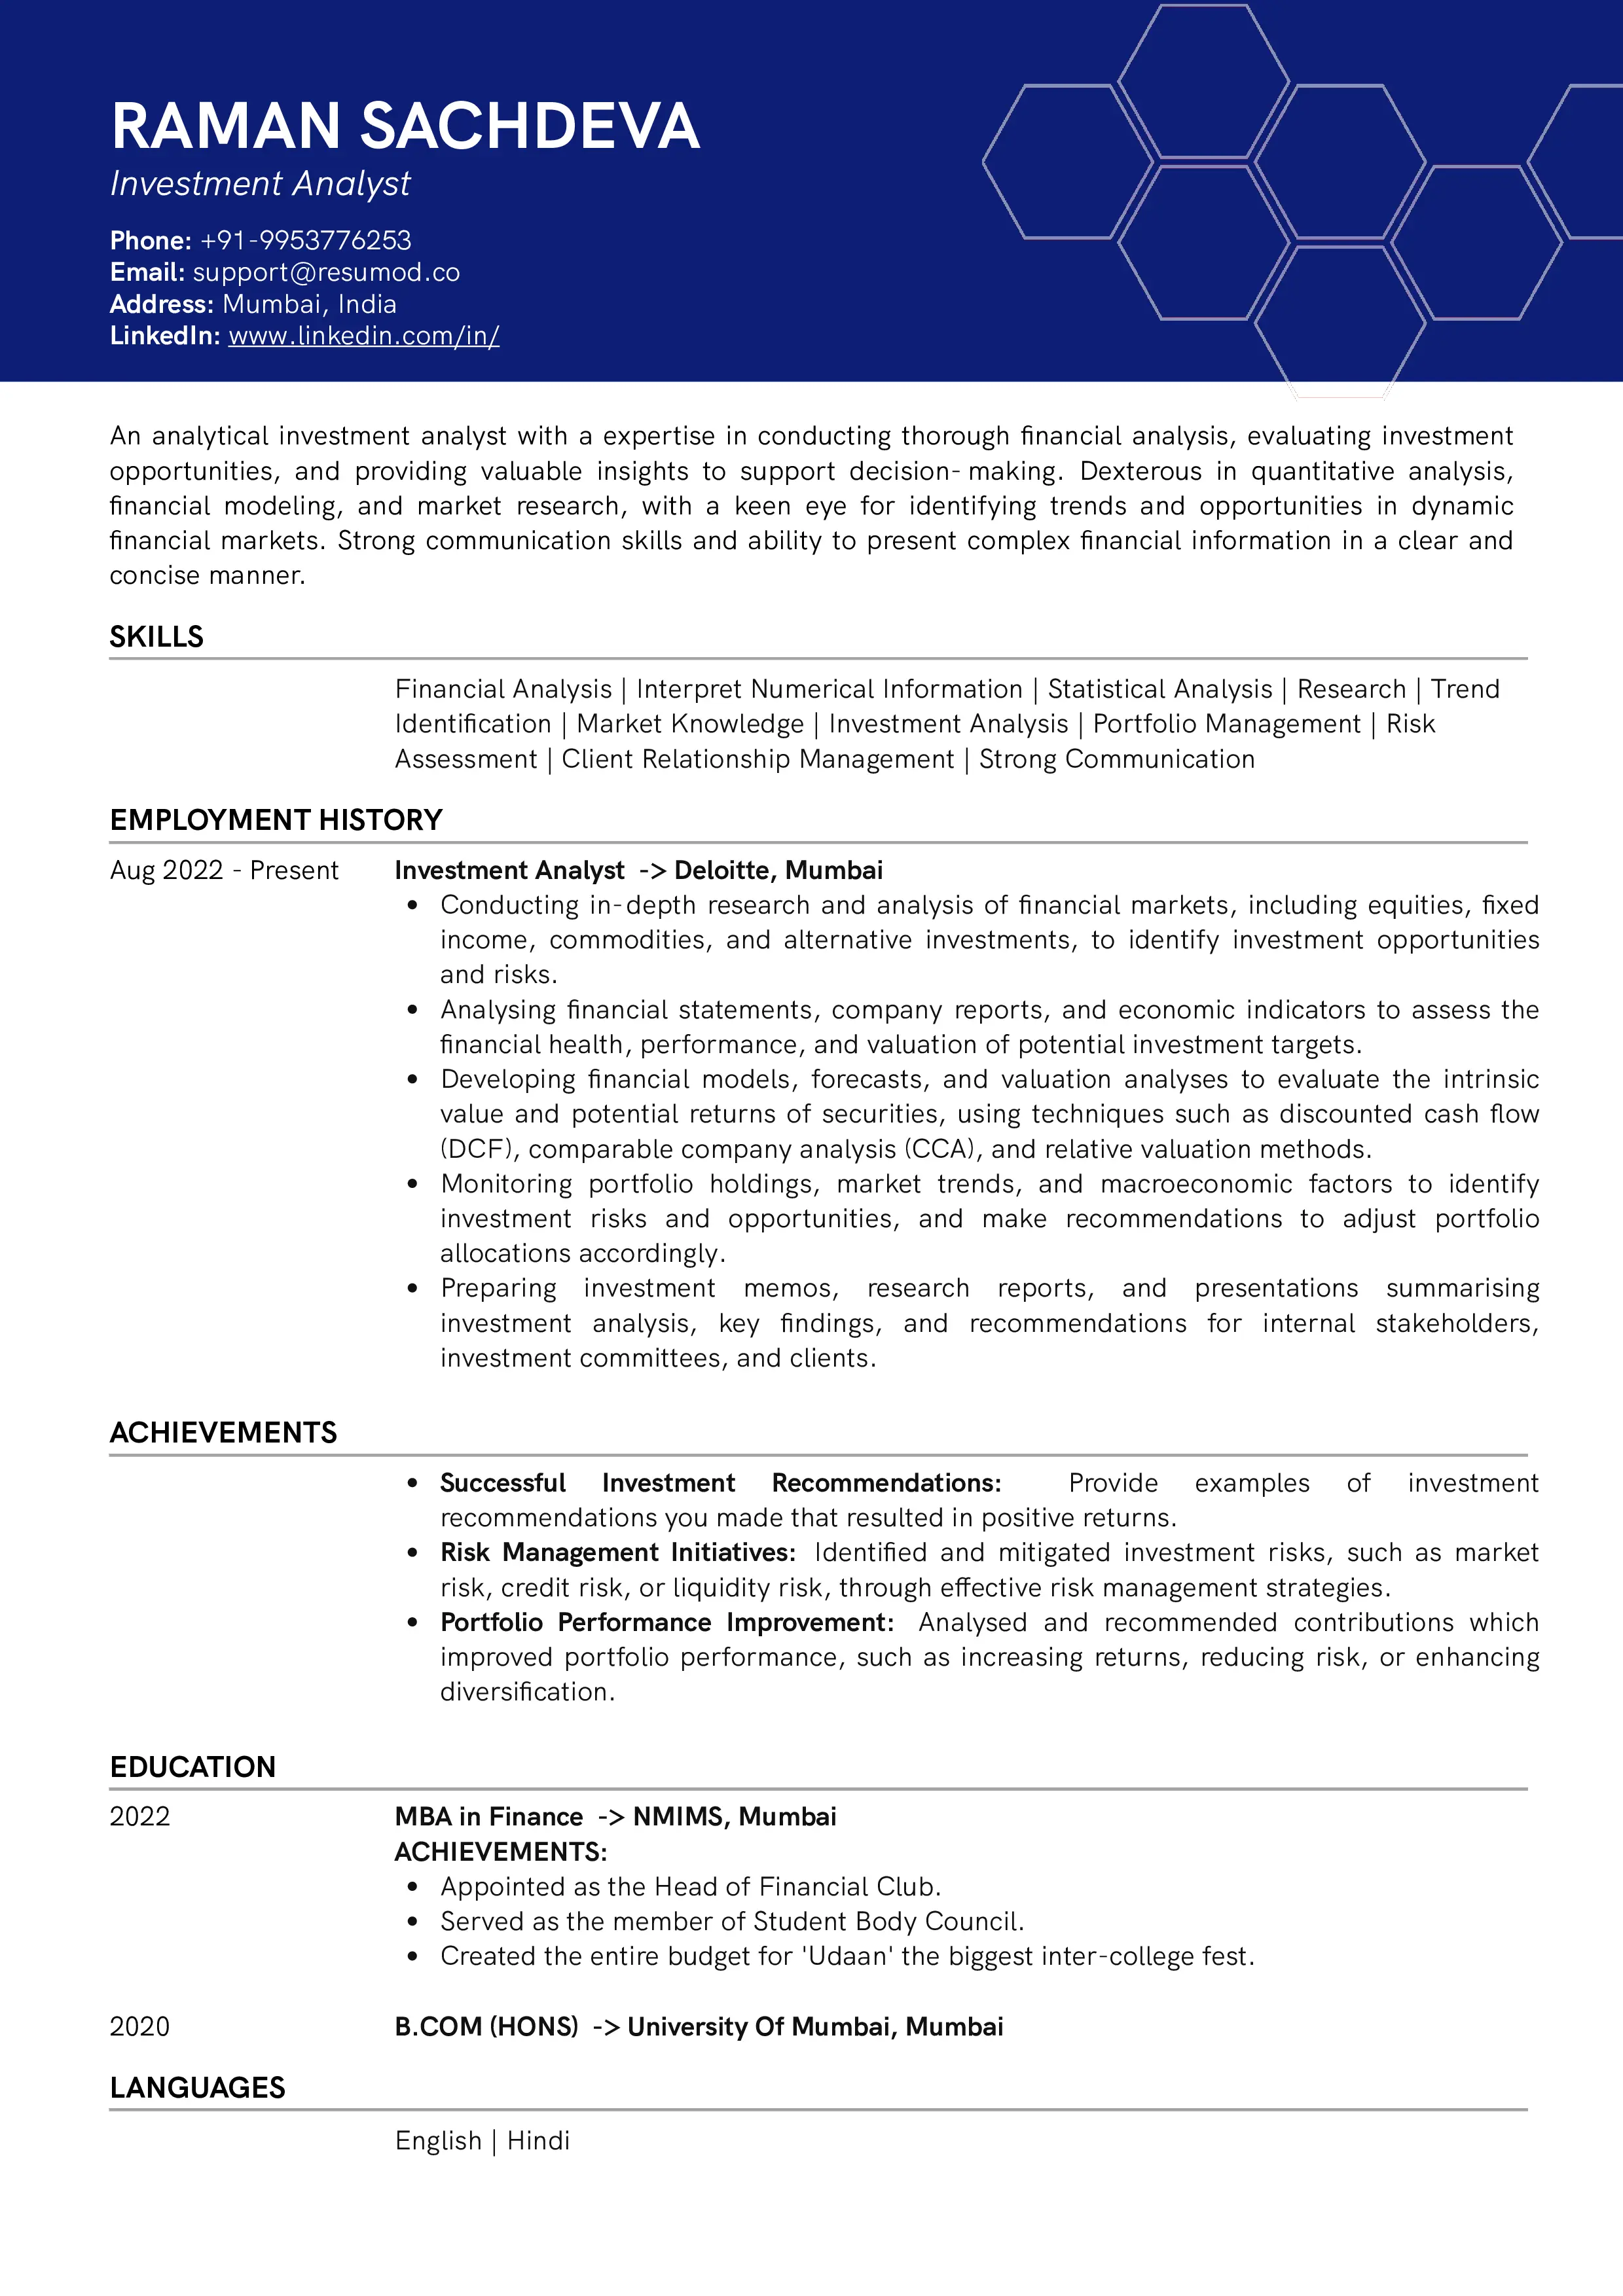 Sample Resume of Investment Analyst | Free Resume Templates & Samples on Resumod.co